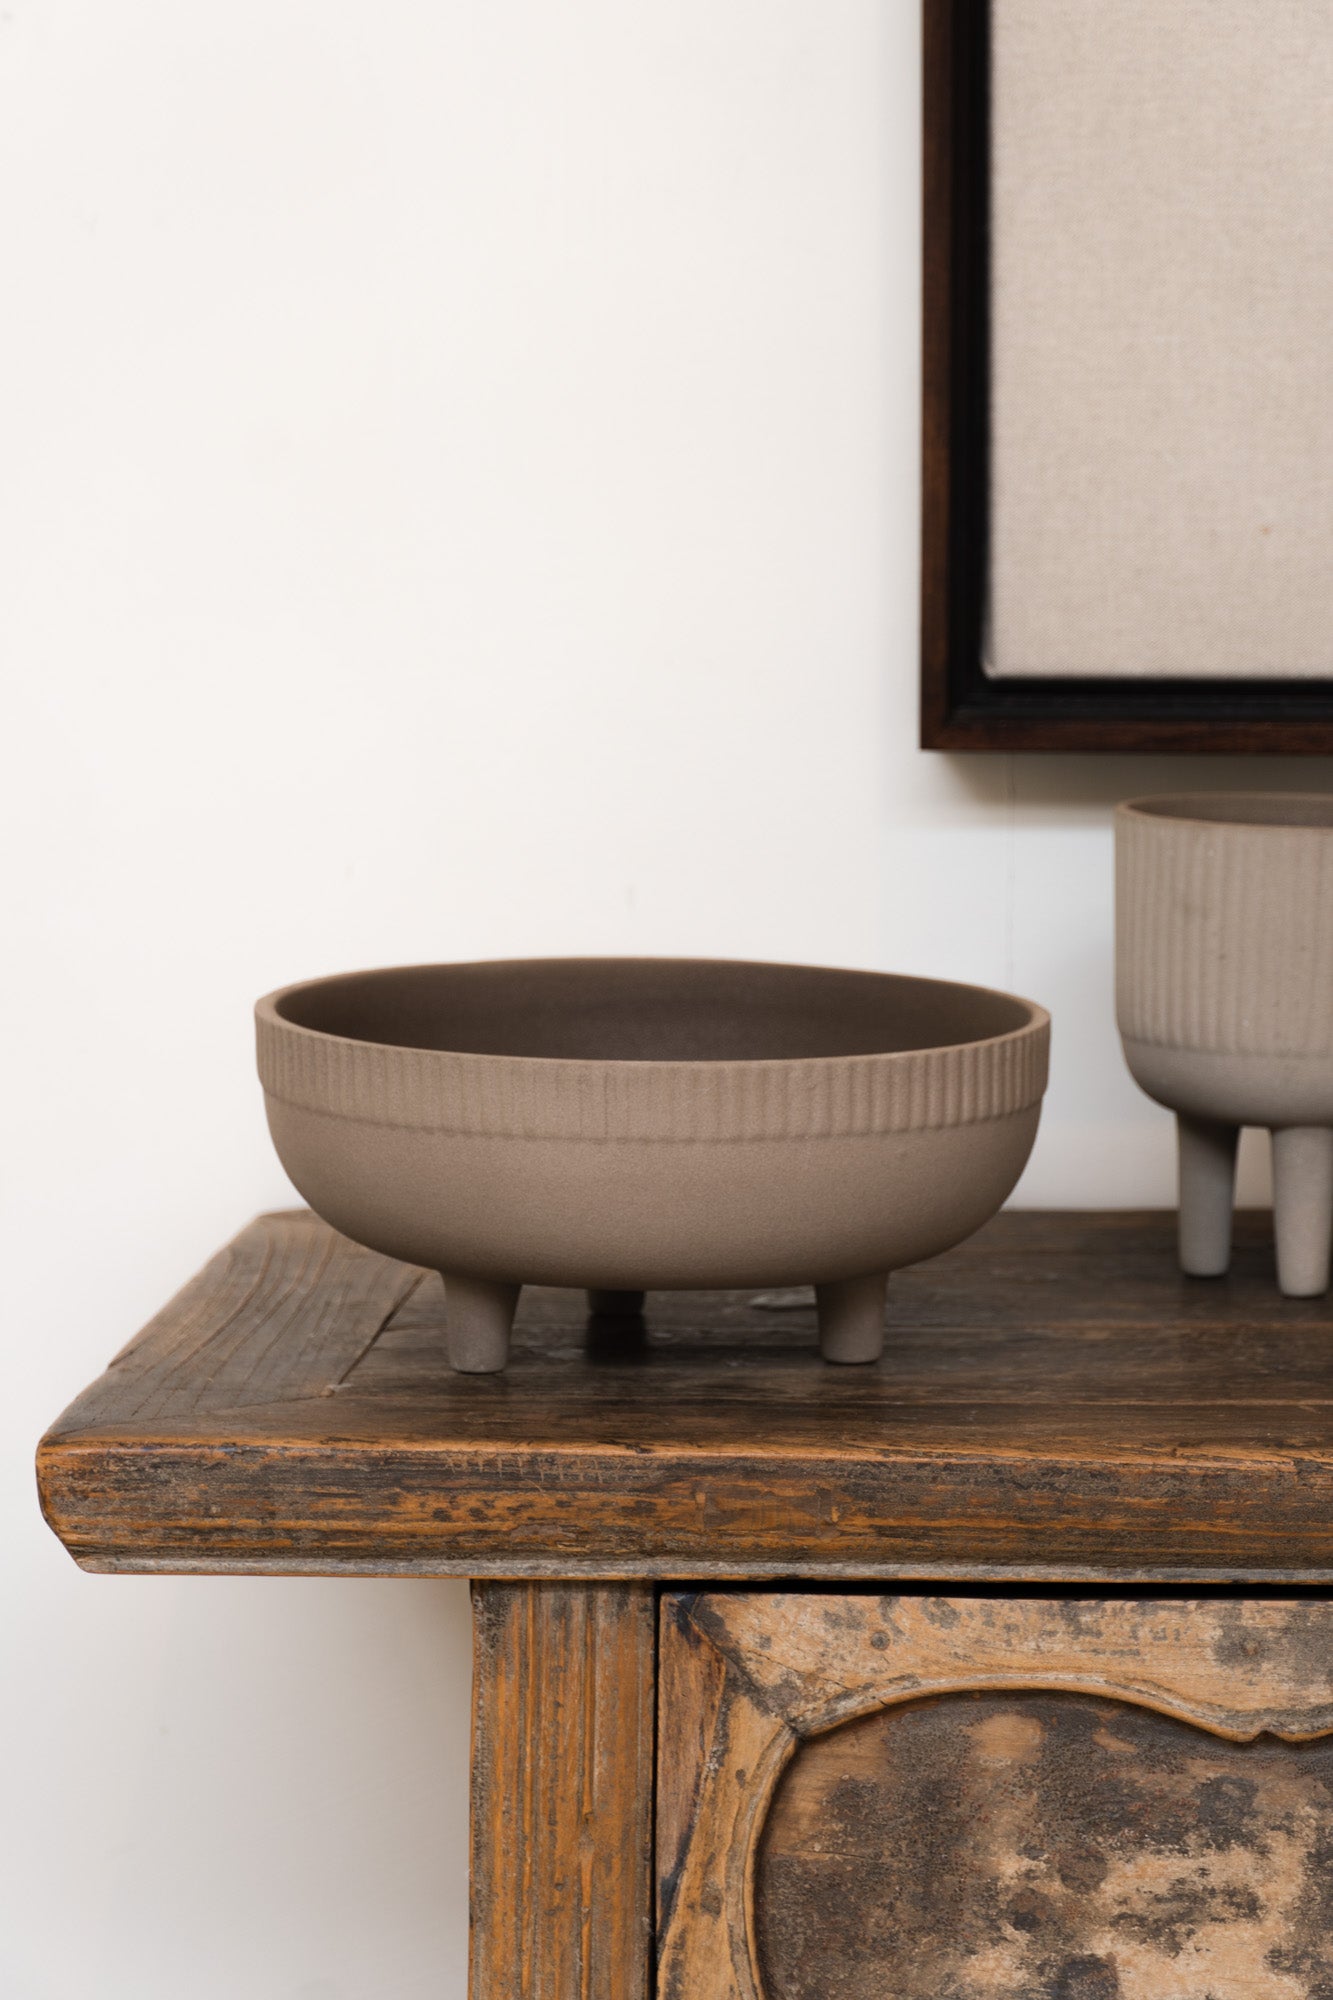 Hygge Bowls and Flower Pots by Kristina Dam in size medium.